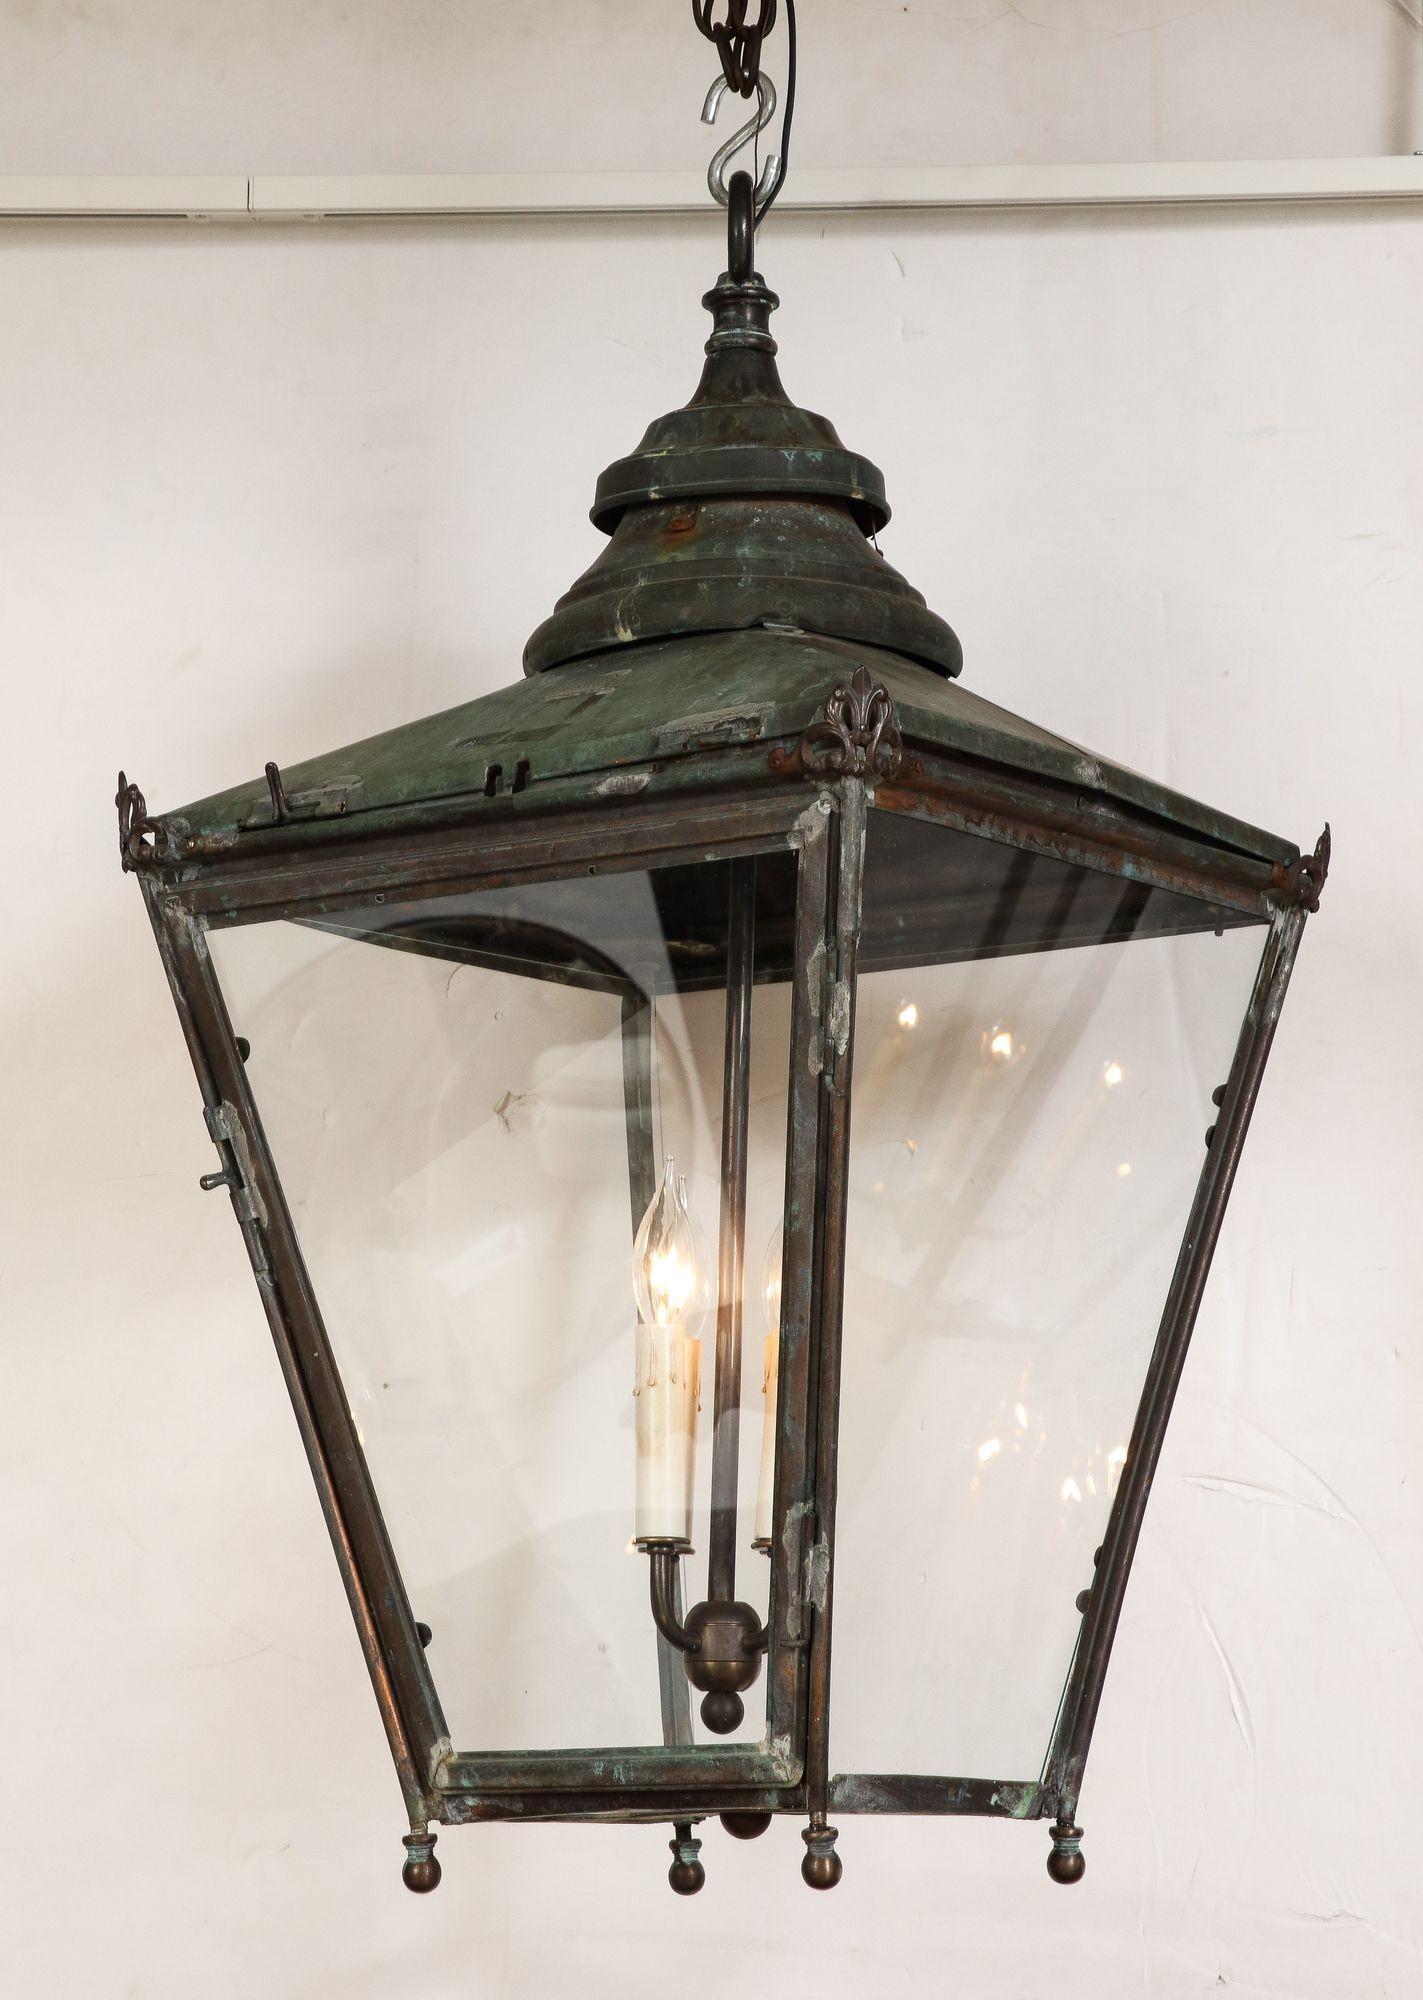 English 19th century copper and glass hanging hall lantern with hip roofed copper top surmounted by double vented rose with integral hanging ring, featuring decorative corner mounts, four canted sides with glass lites of which one is an openable